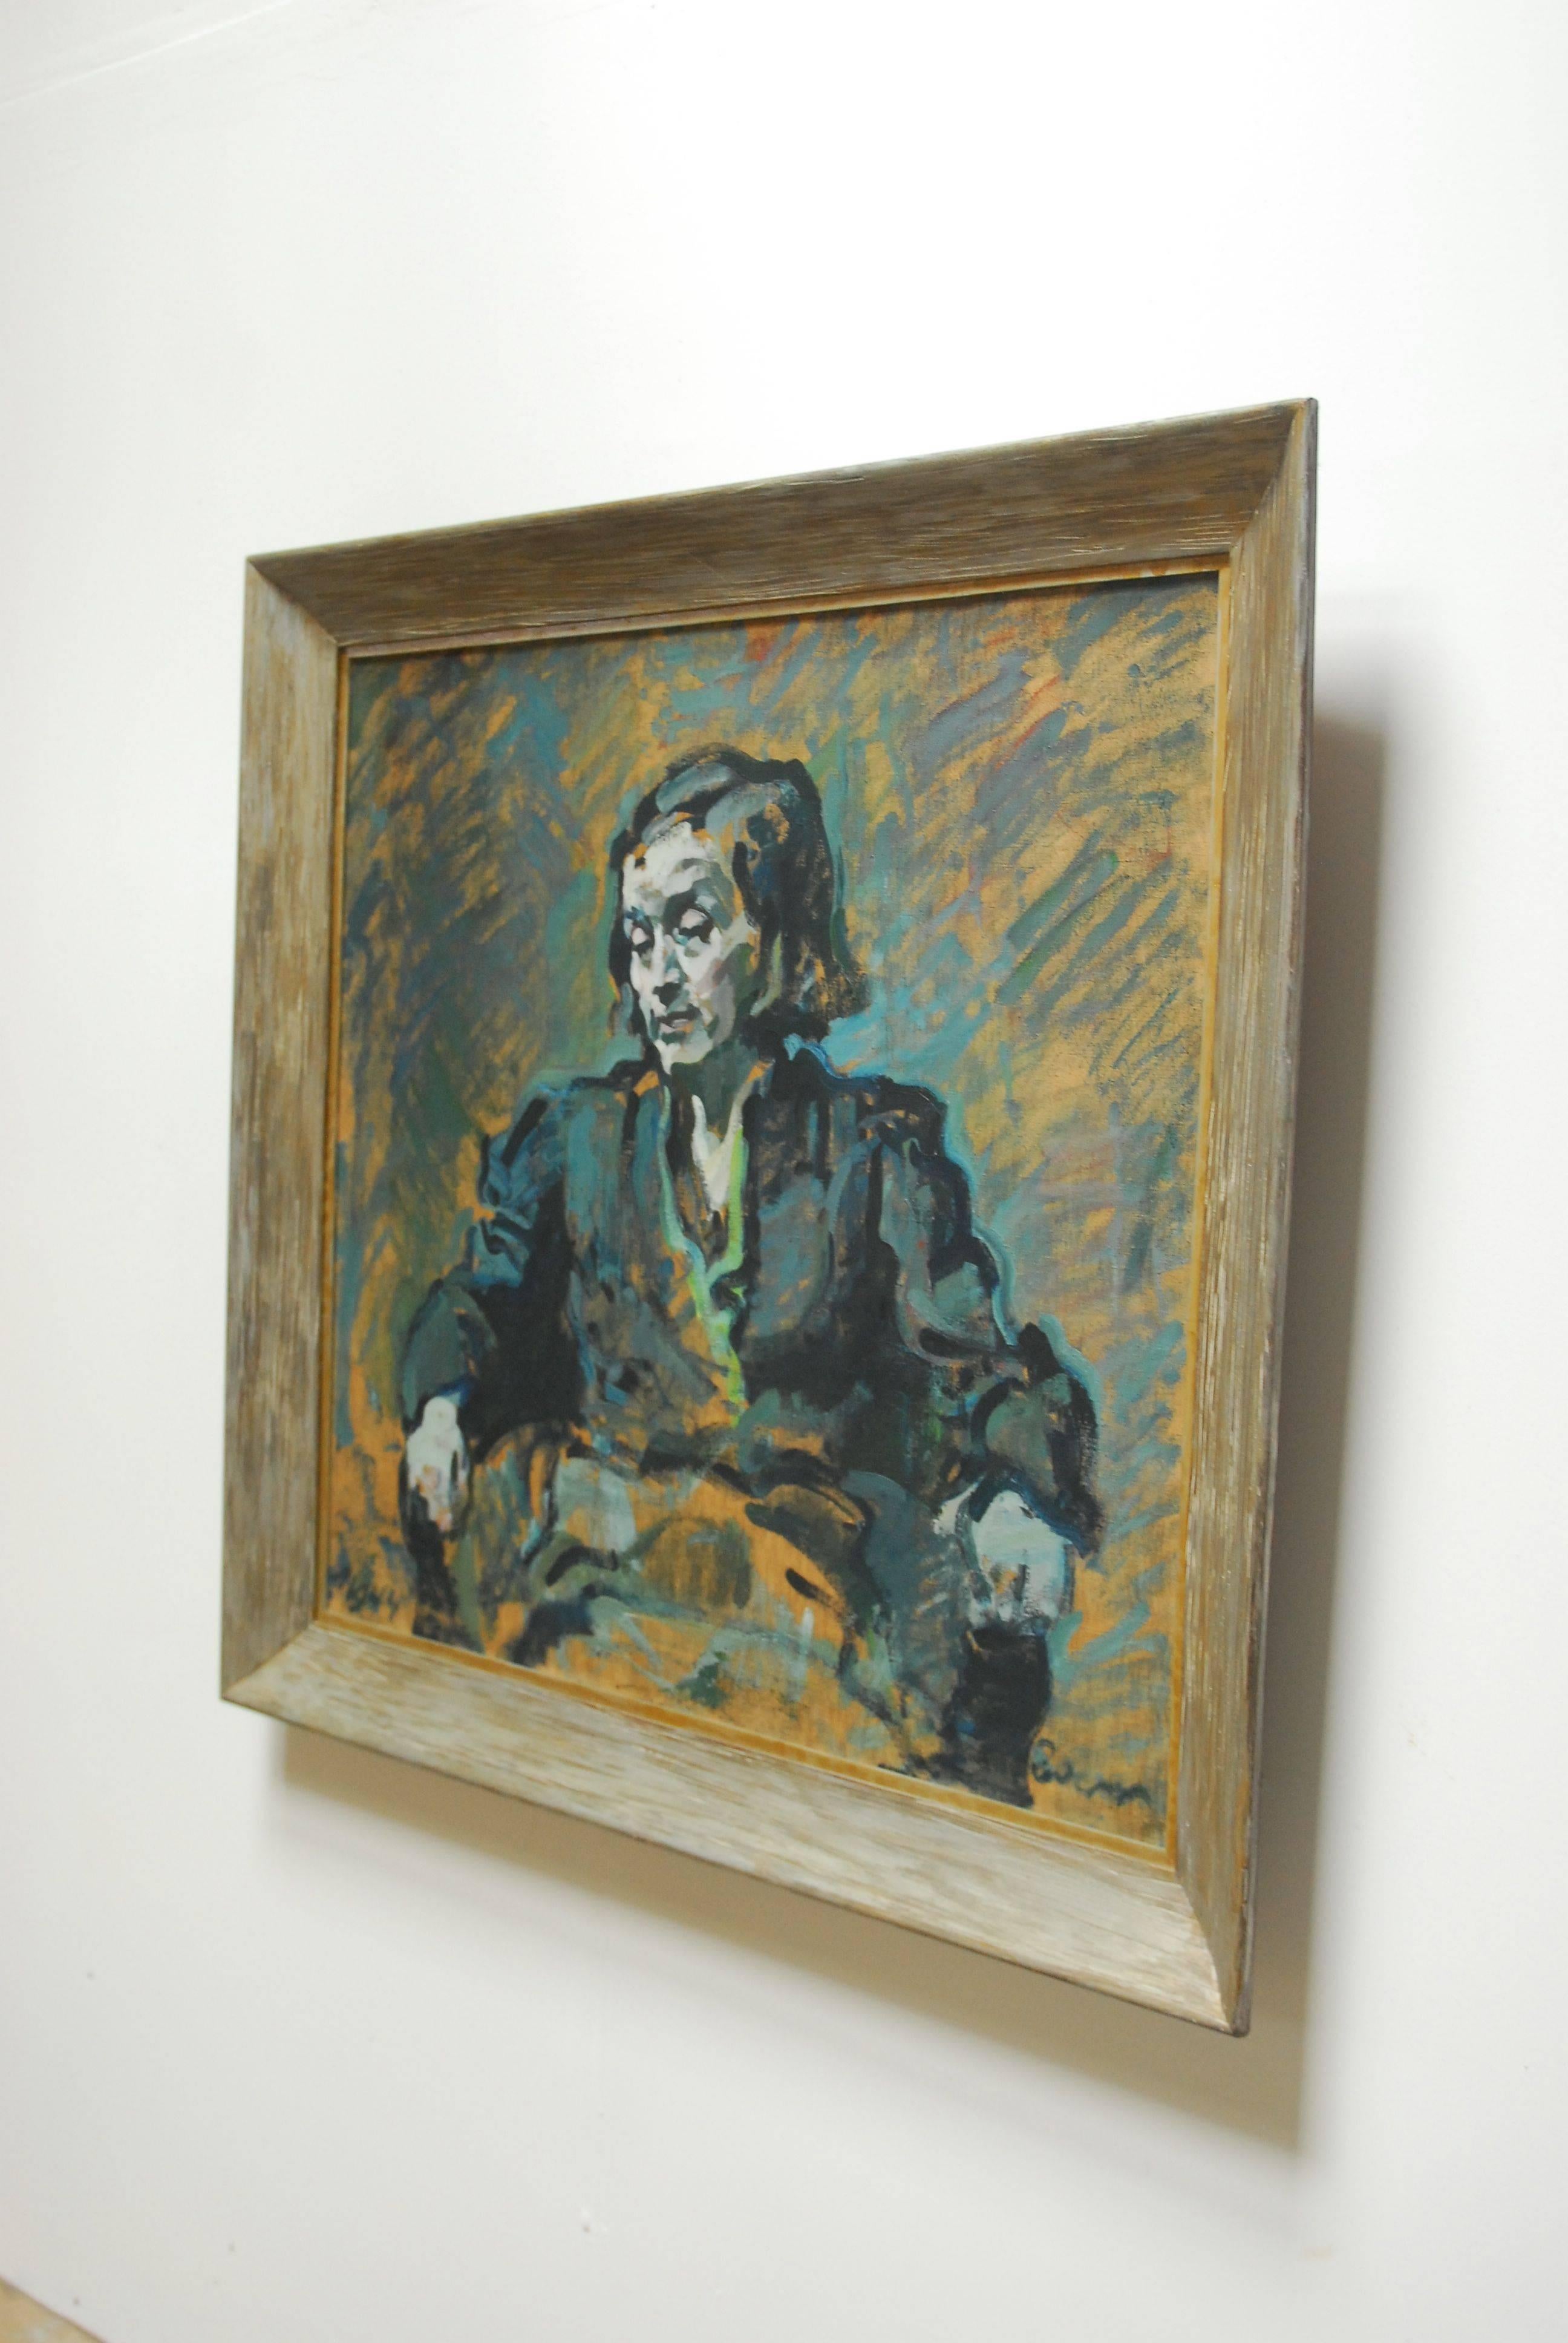 Portrait of Marqaritte oil on canvas painting by Franz Rederer (1899-1965) born in Switzerland. Captivating portrait of the artist's wife seated, signed lower right corner and dated lower left. Set in a thick cerused wood frame.